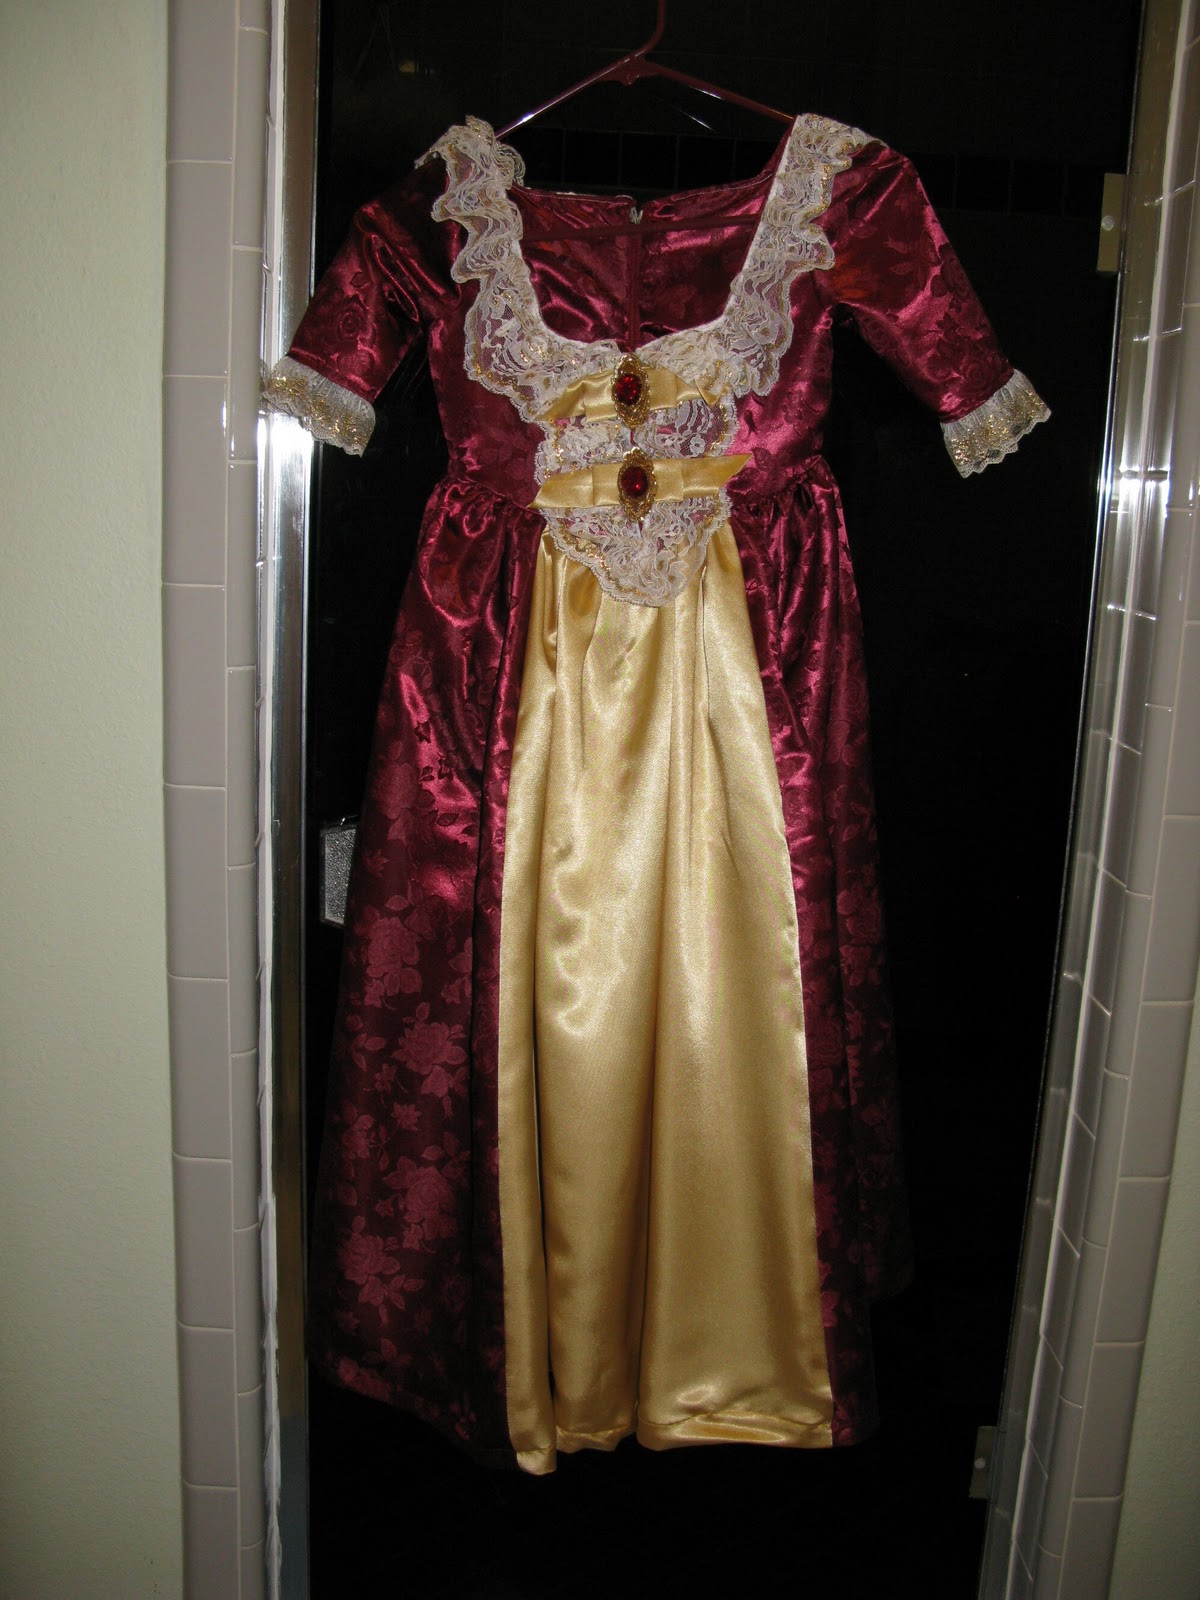 snowyegret: American Girl Gala gown for doll and girl